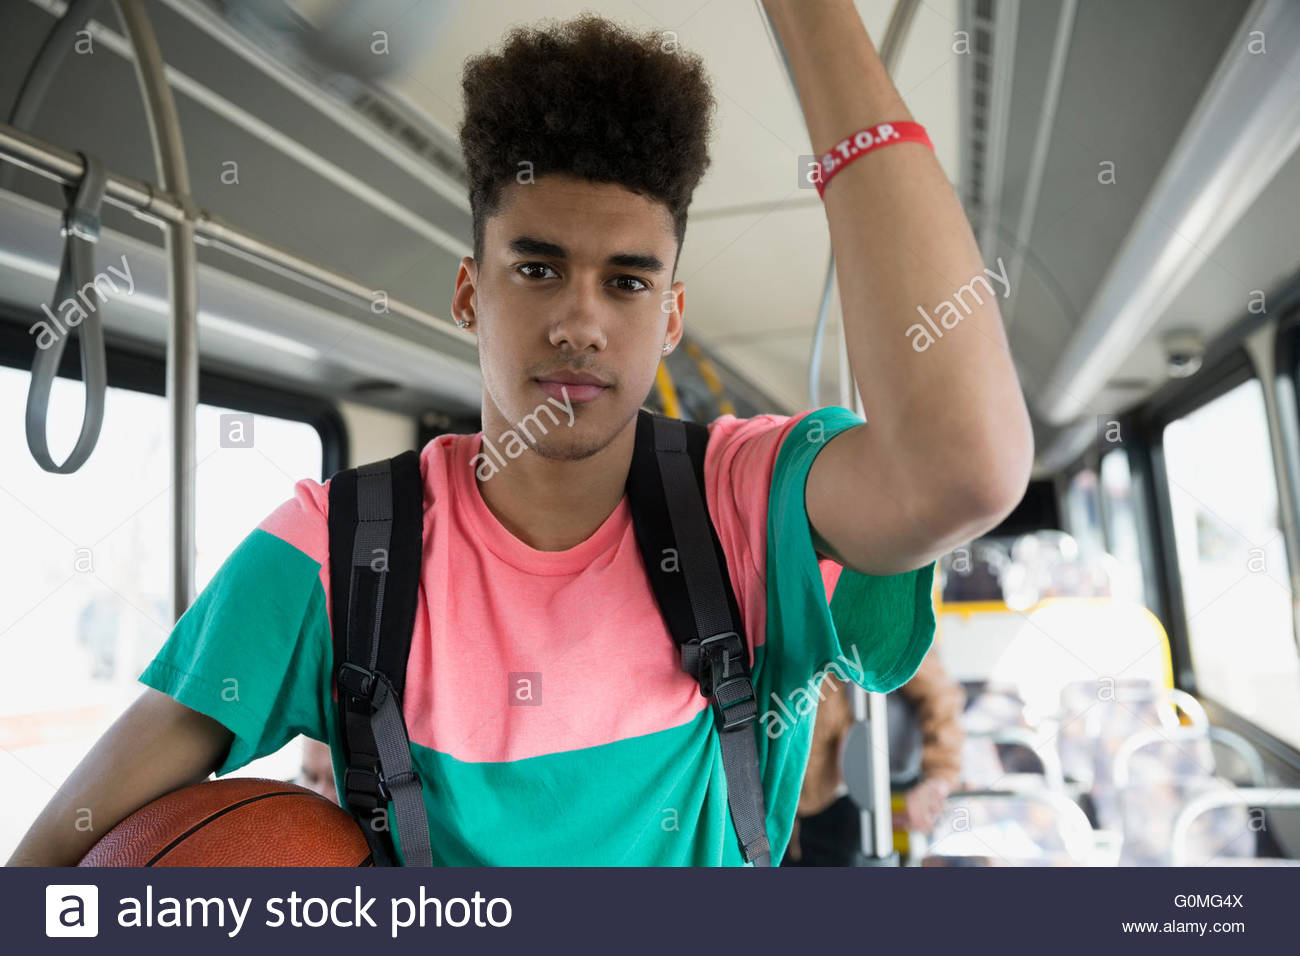 Portrait serious young man with basketball riding bus Stock Photo